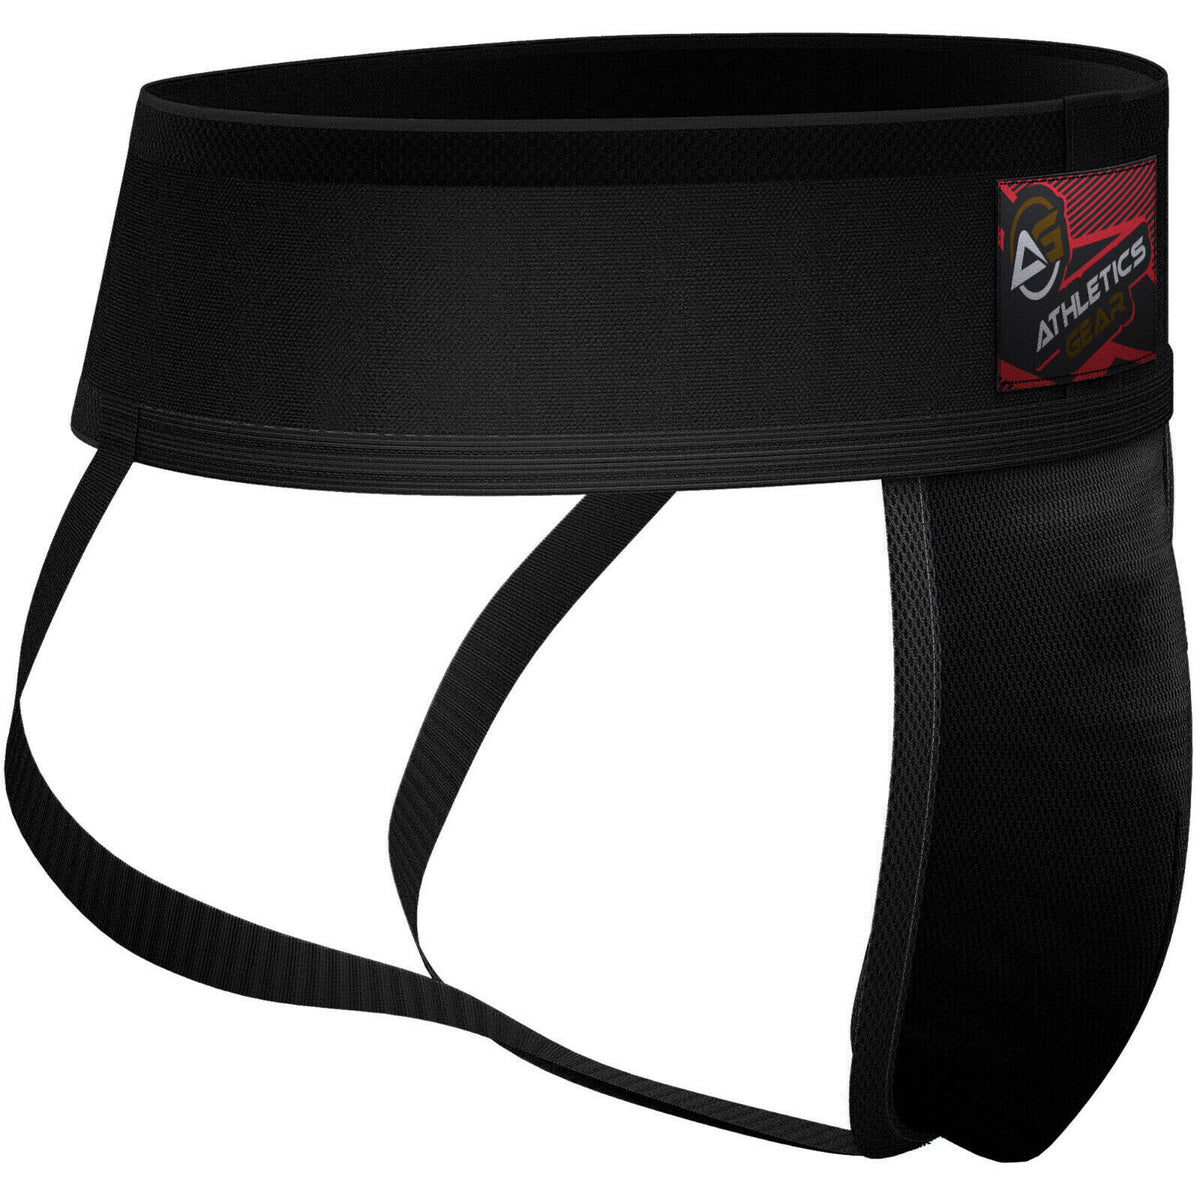 Sports Direct Groin Guard - Carbon Flex Groin Protector Cup Sports Groin Guard With Cup Boxing MMA Protector Box Martial Arts Abdo Jockstrap